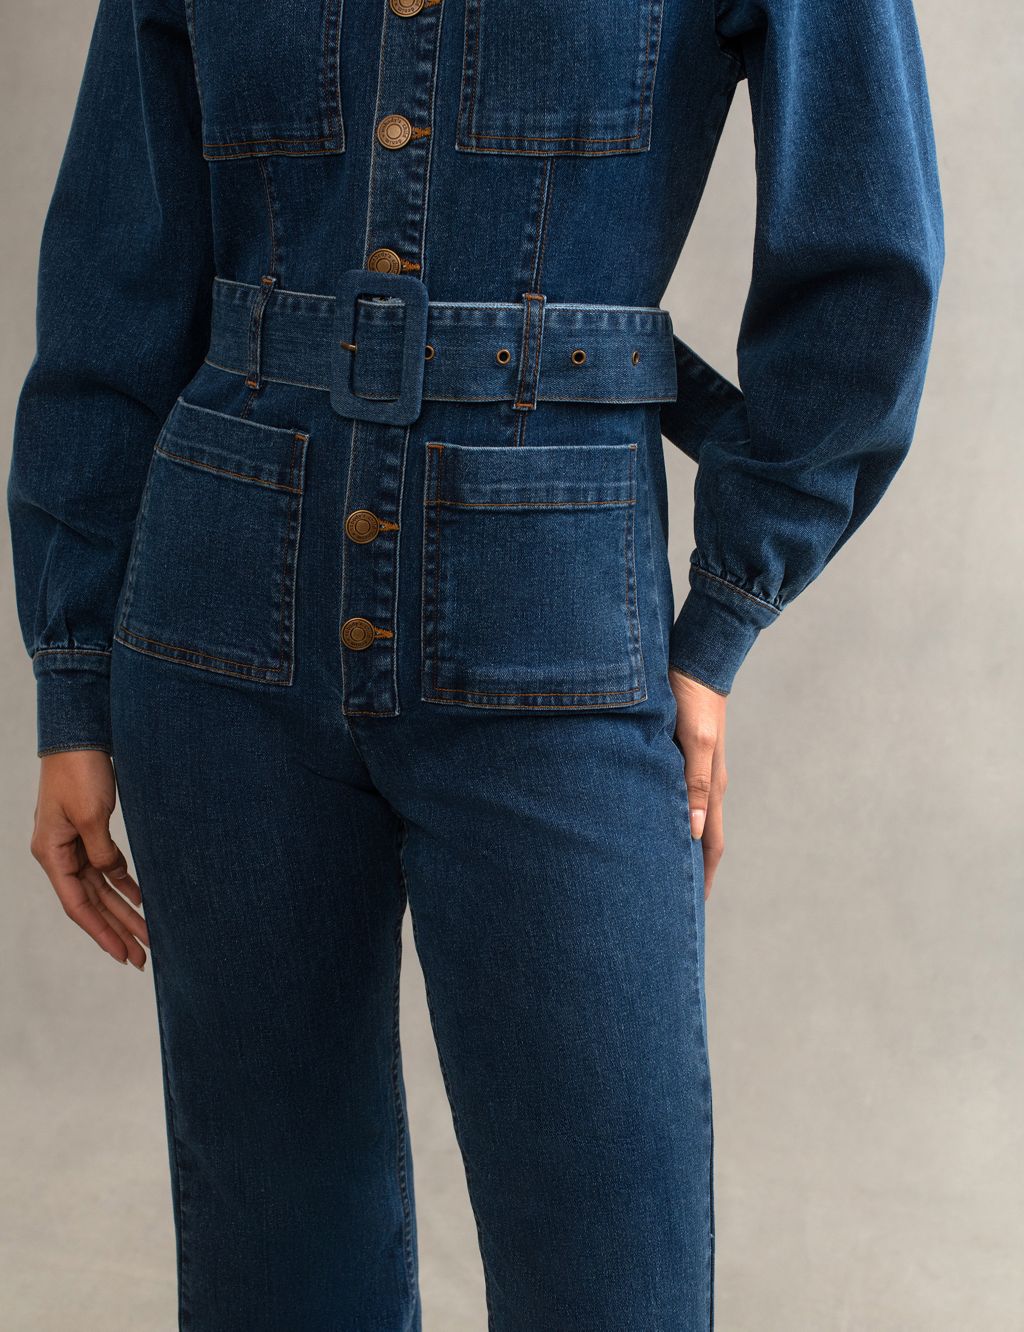 Denim Button Front Belted Waisted Jumpsuit image 5